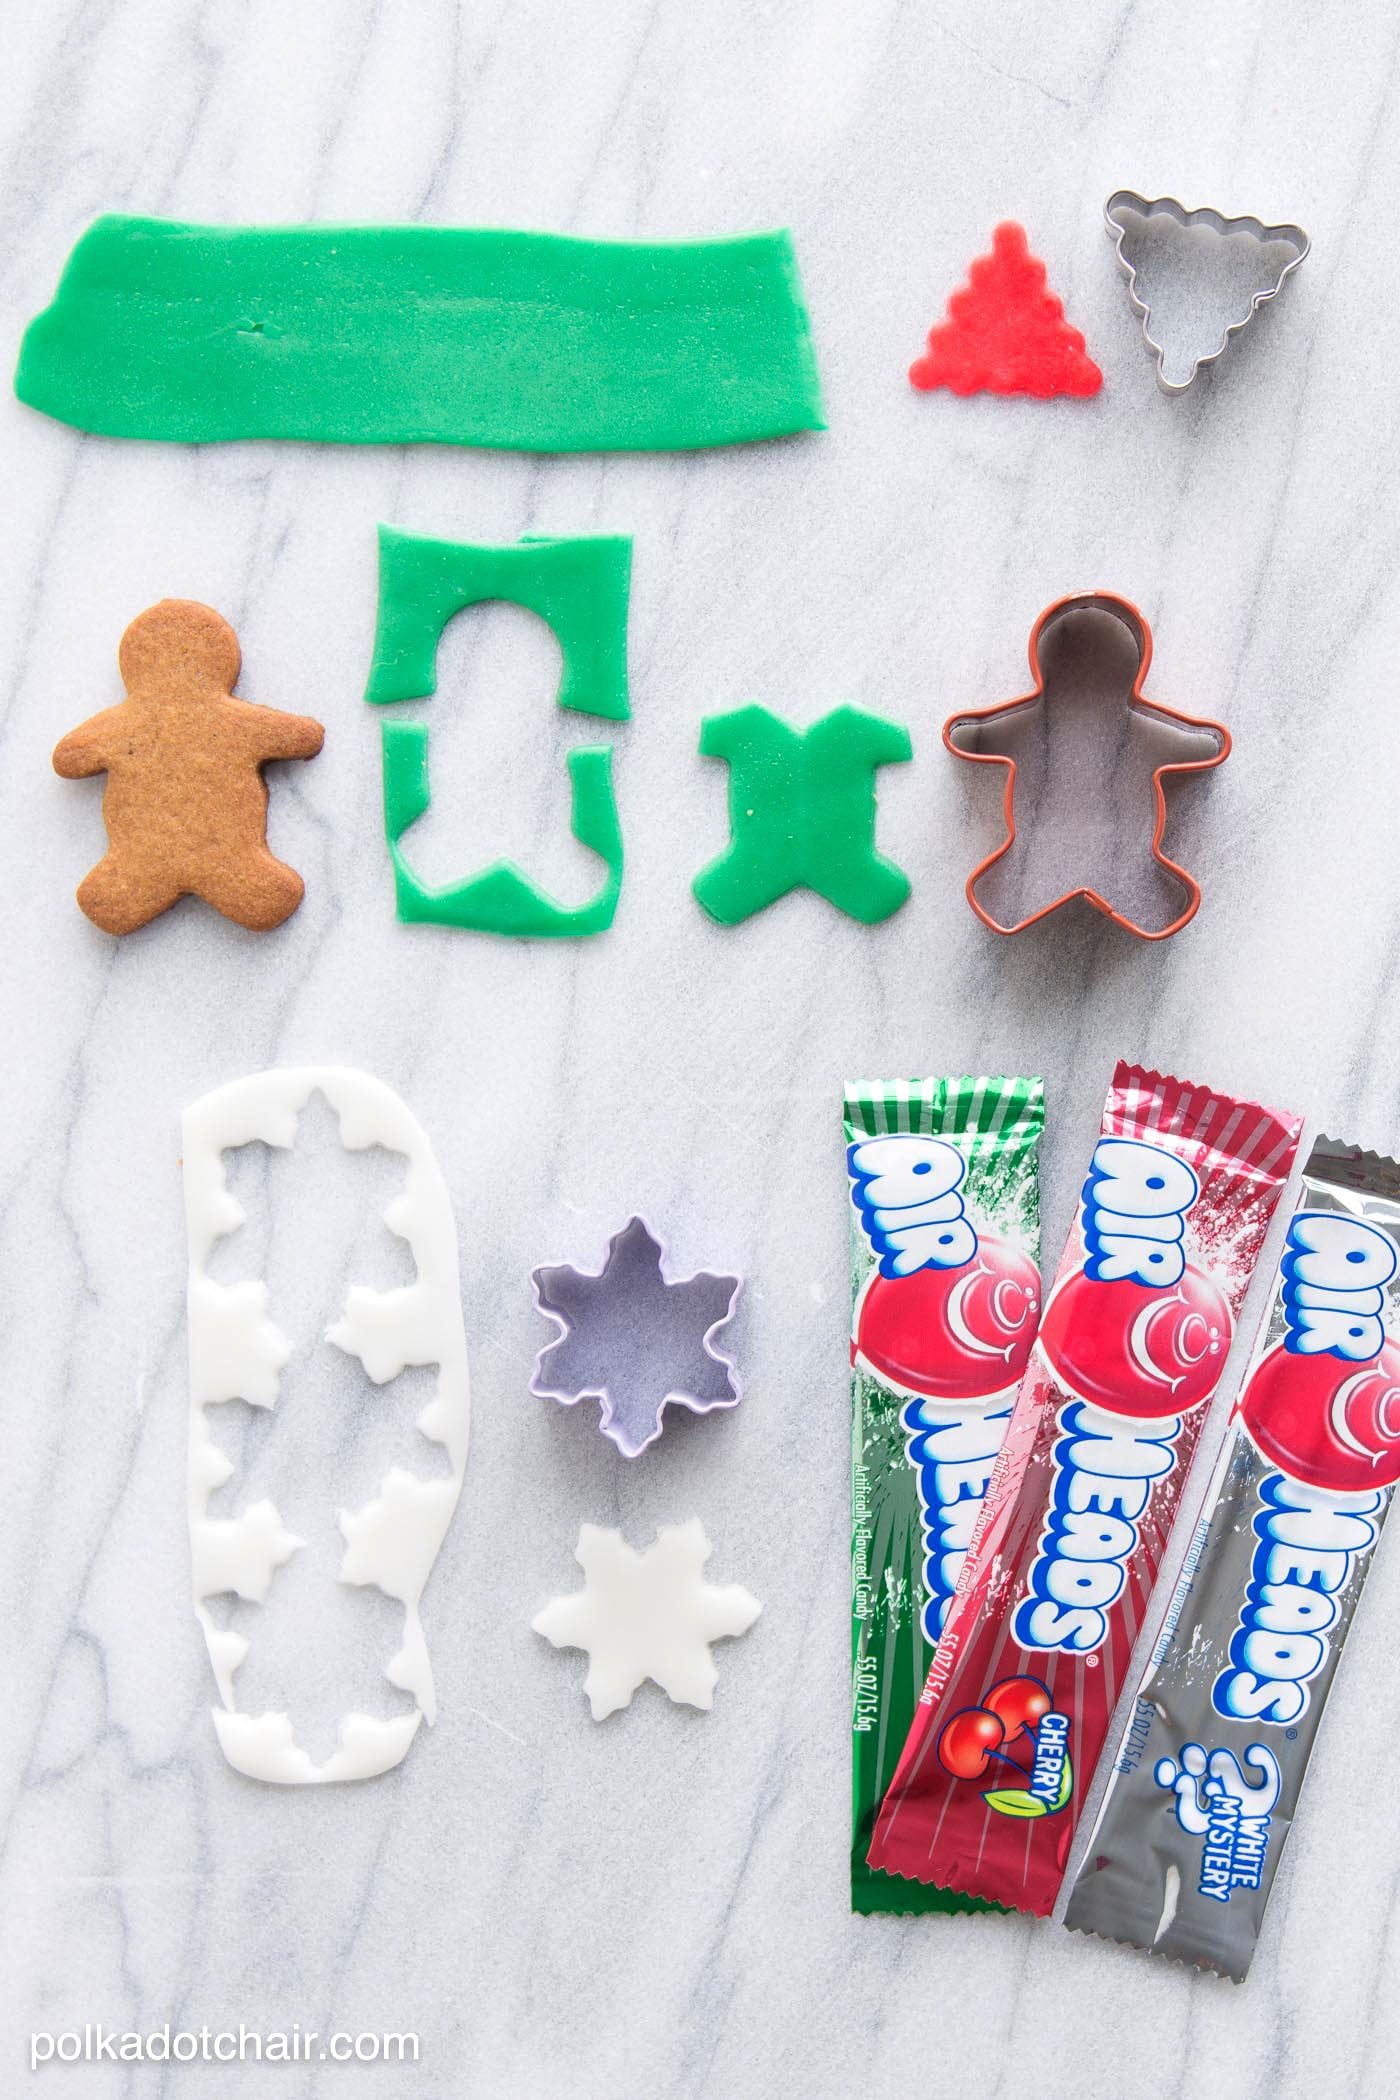 Christmas Gingerbread Cookie Decorating Ideas, use Airheads candy to cut out "clothes" and accessories for your gingerbread men